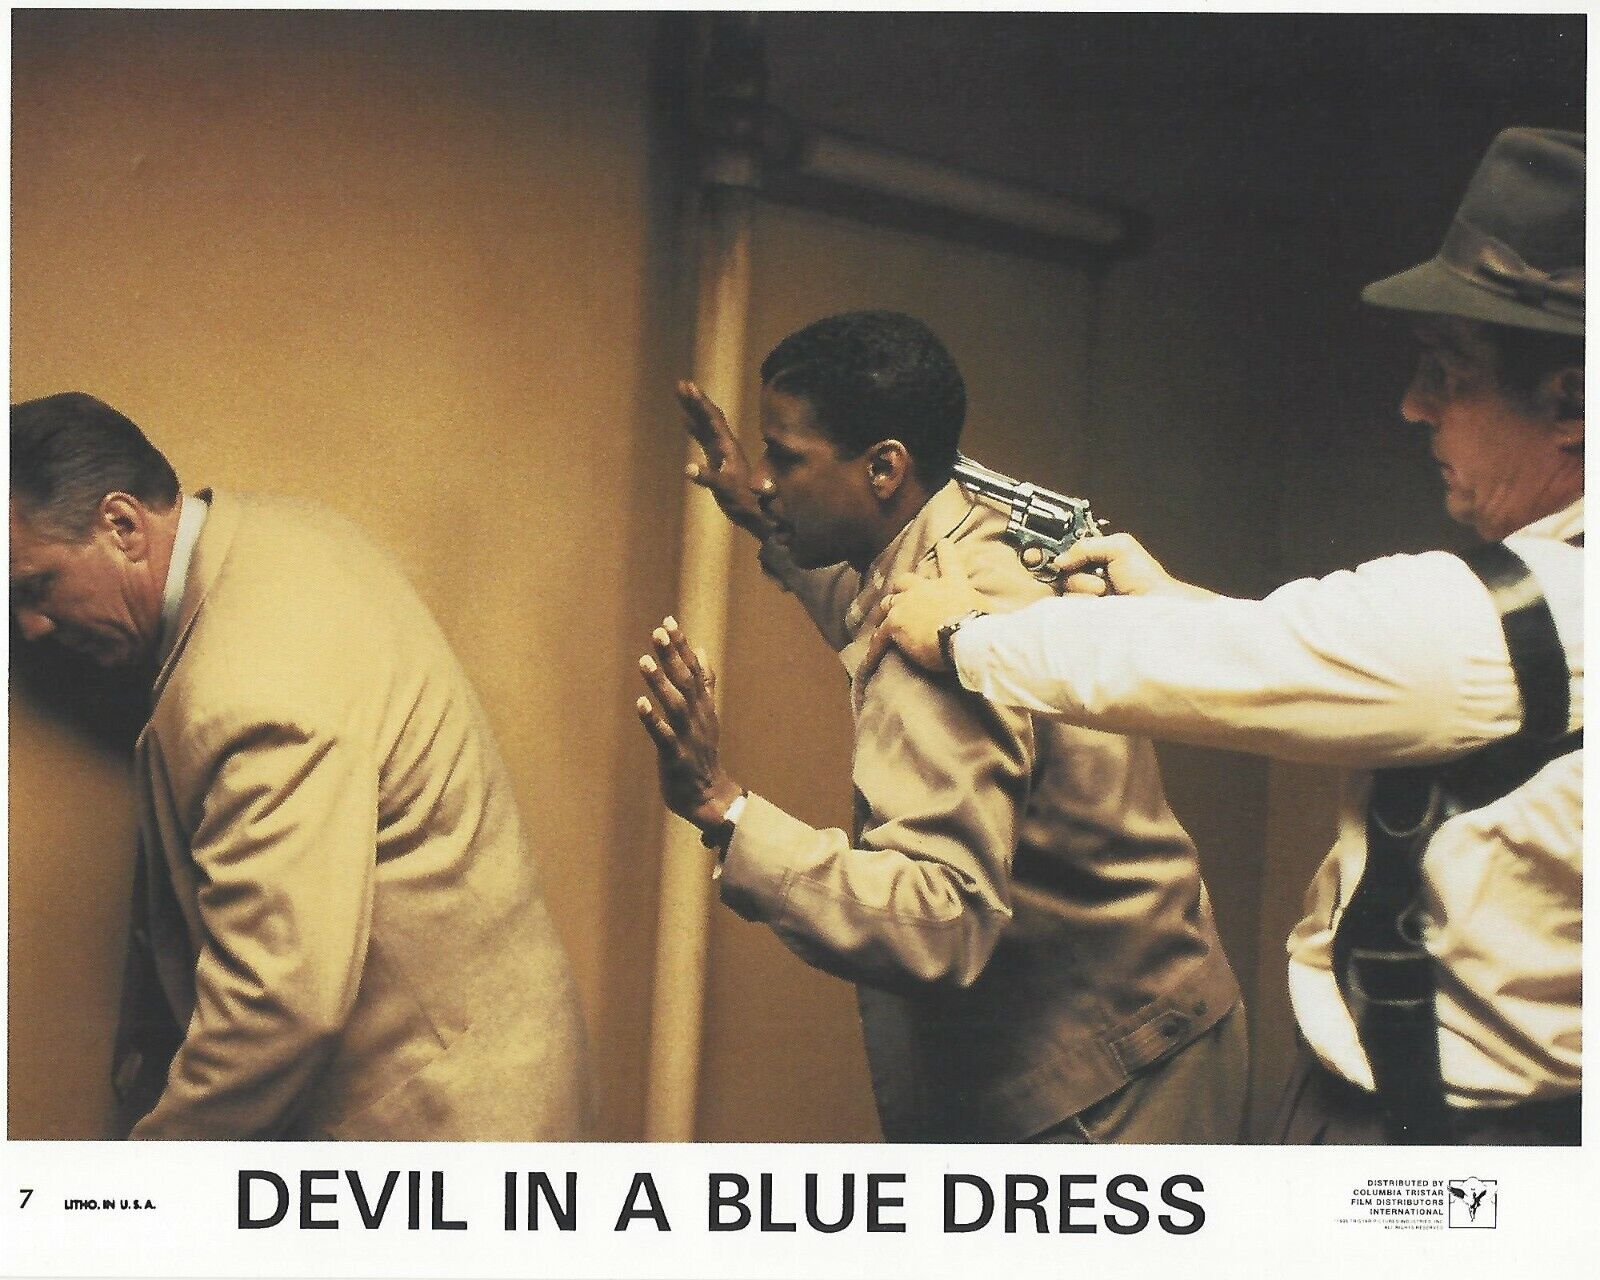 Devil In A Blue Dress Original 8x10 Lobby Card Poster 1995 Photo Poster painting #7 Denzel